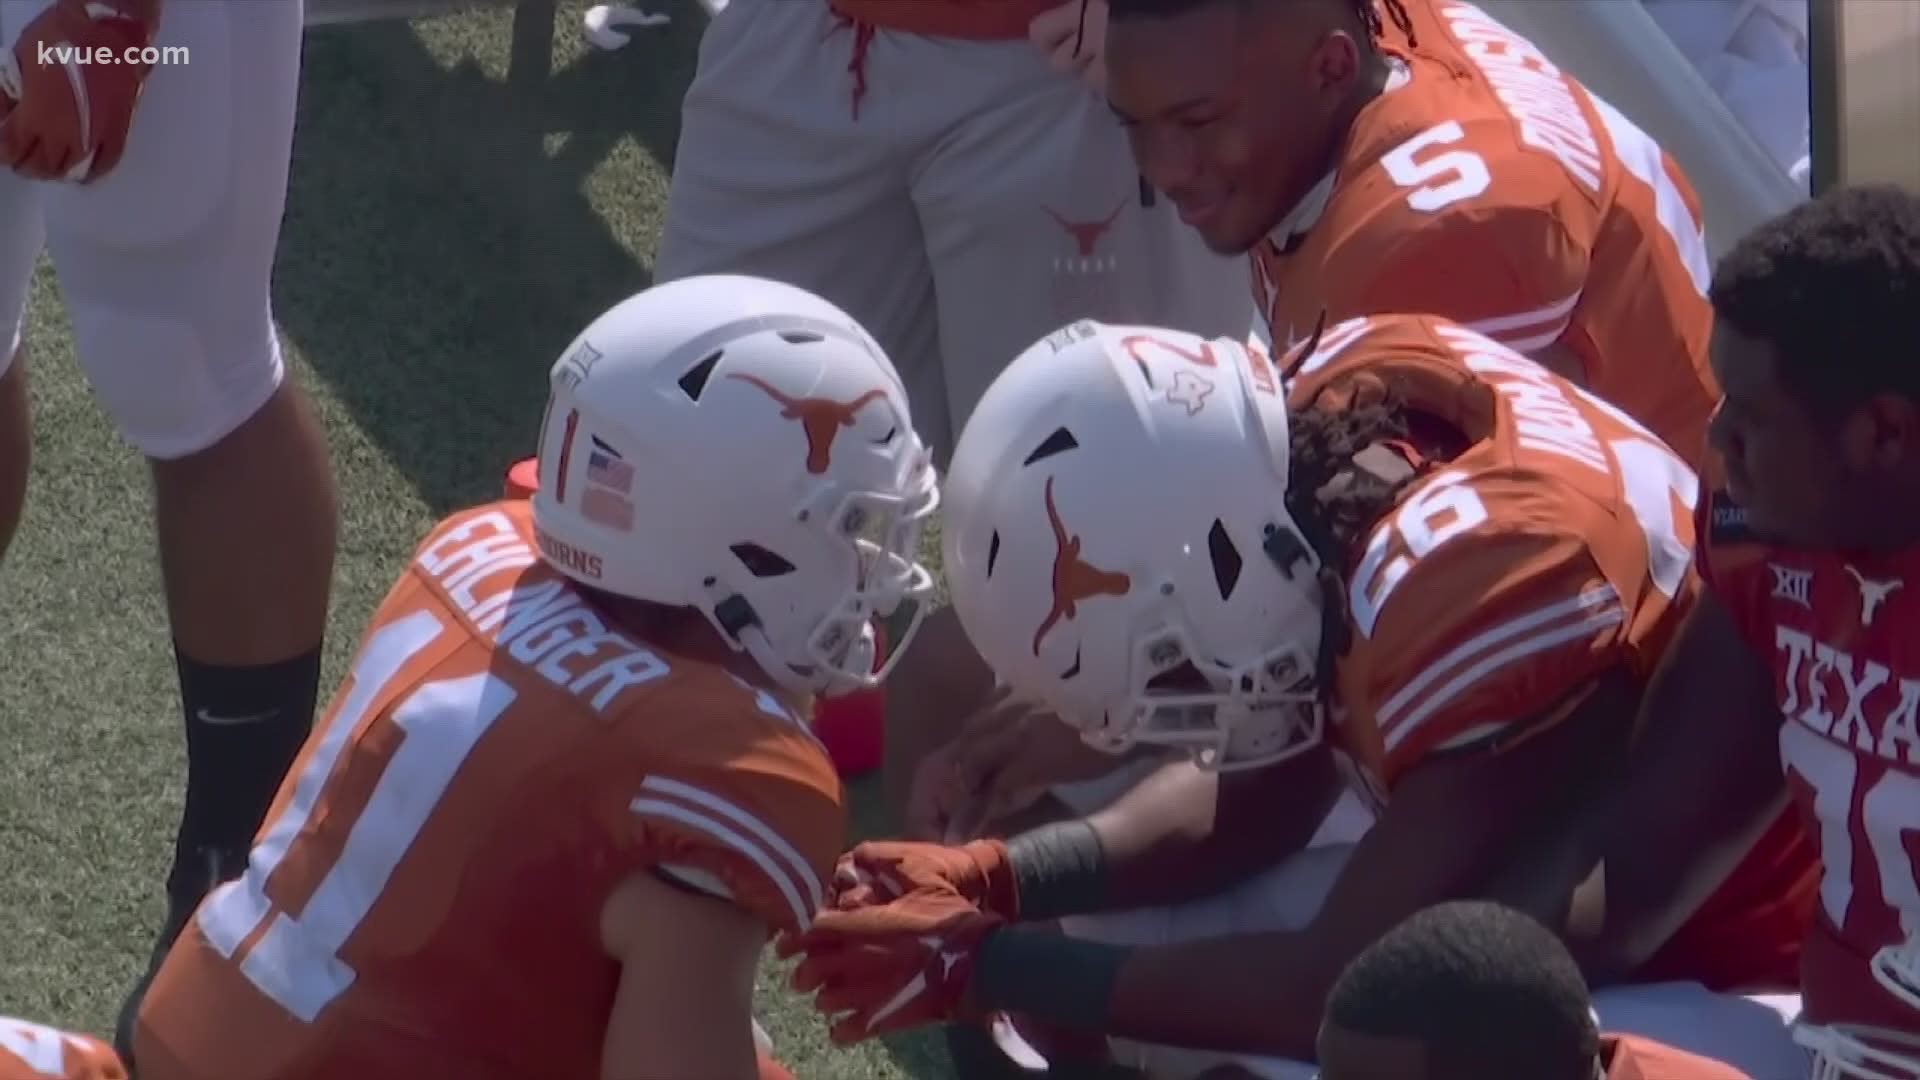 Two of the toughest plays for UT fans to watch this season were Keaontay Ingram fumbles. Ingram has since refocused and spoke about his struggles.